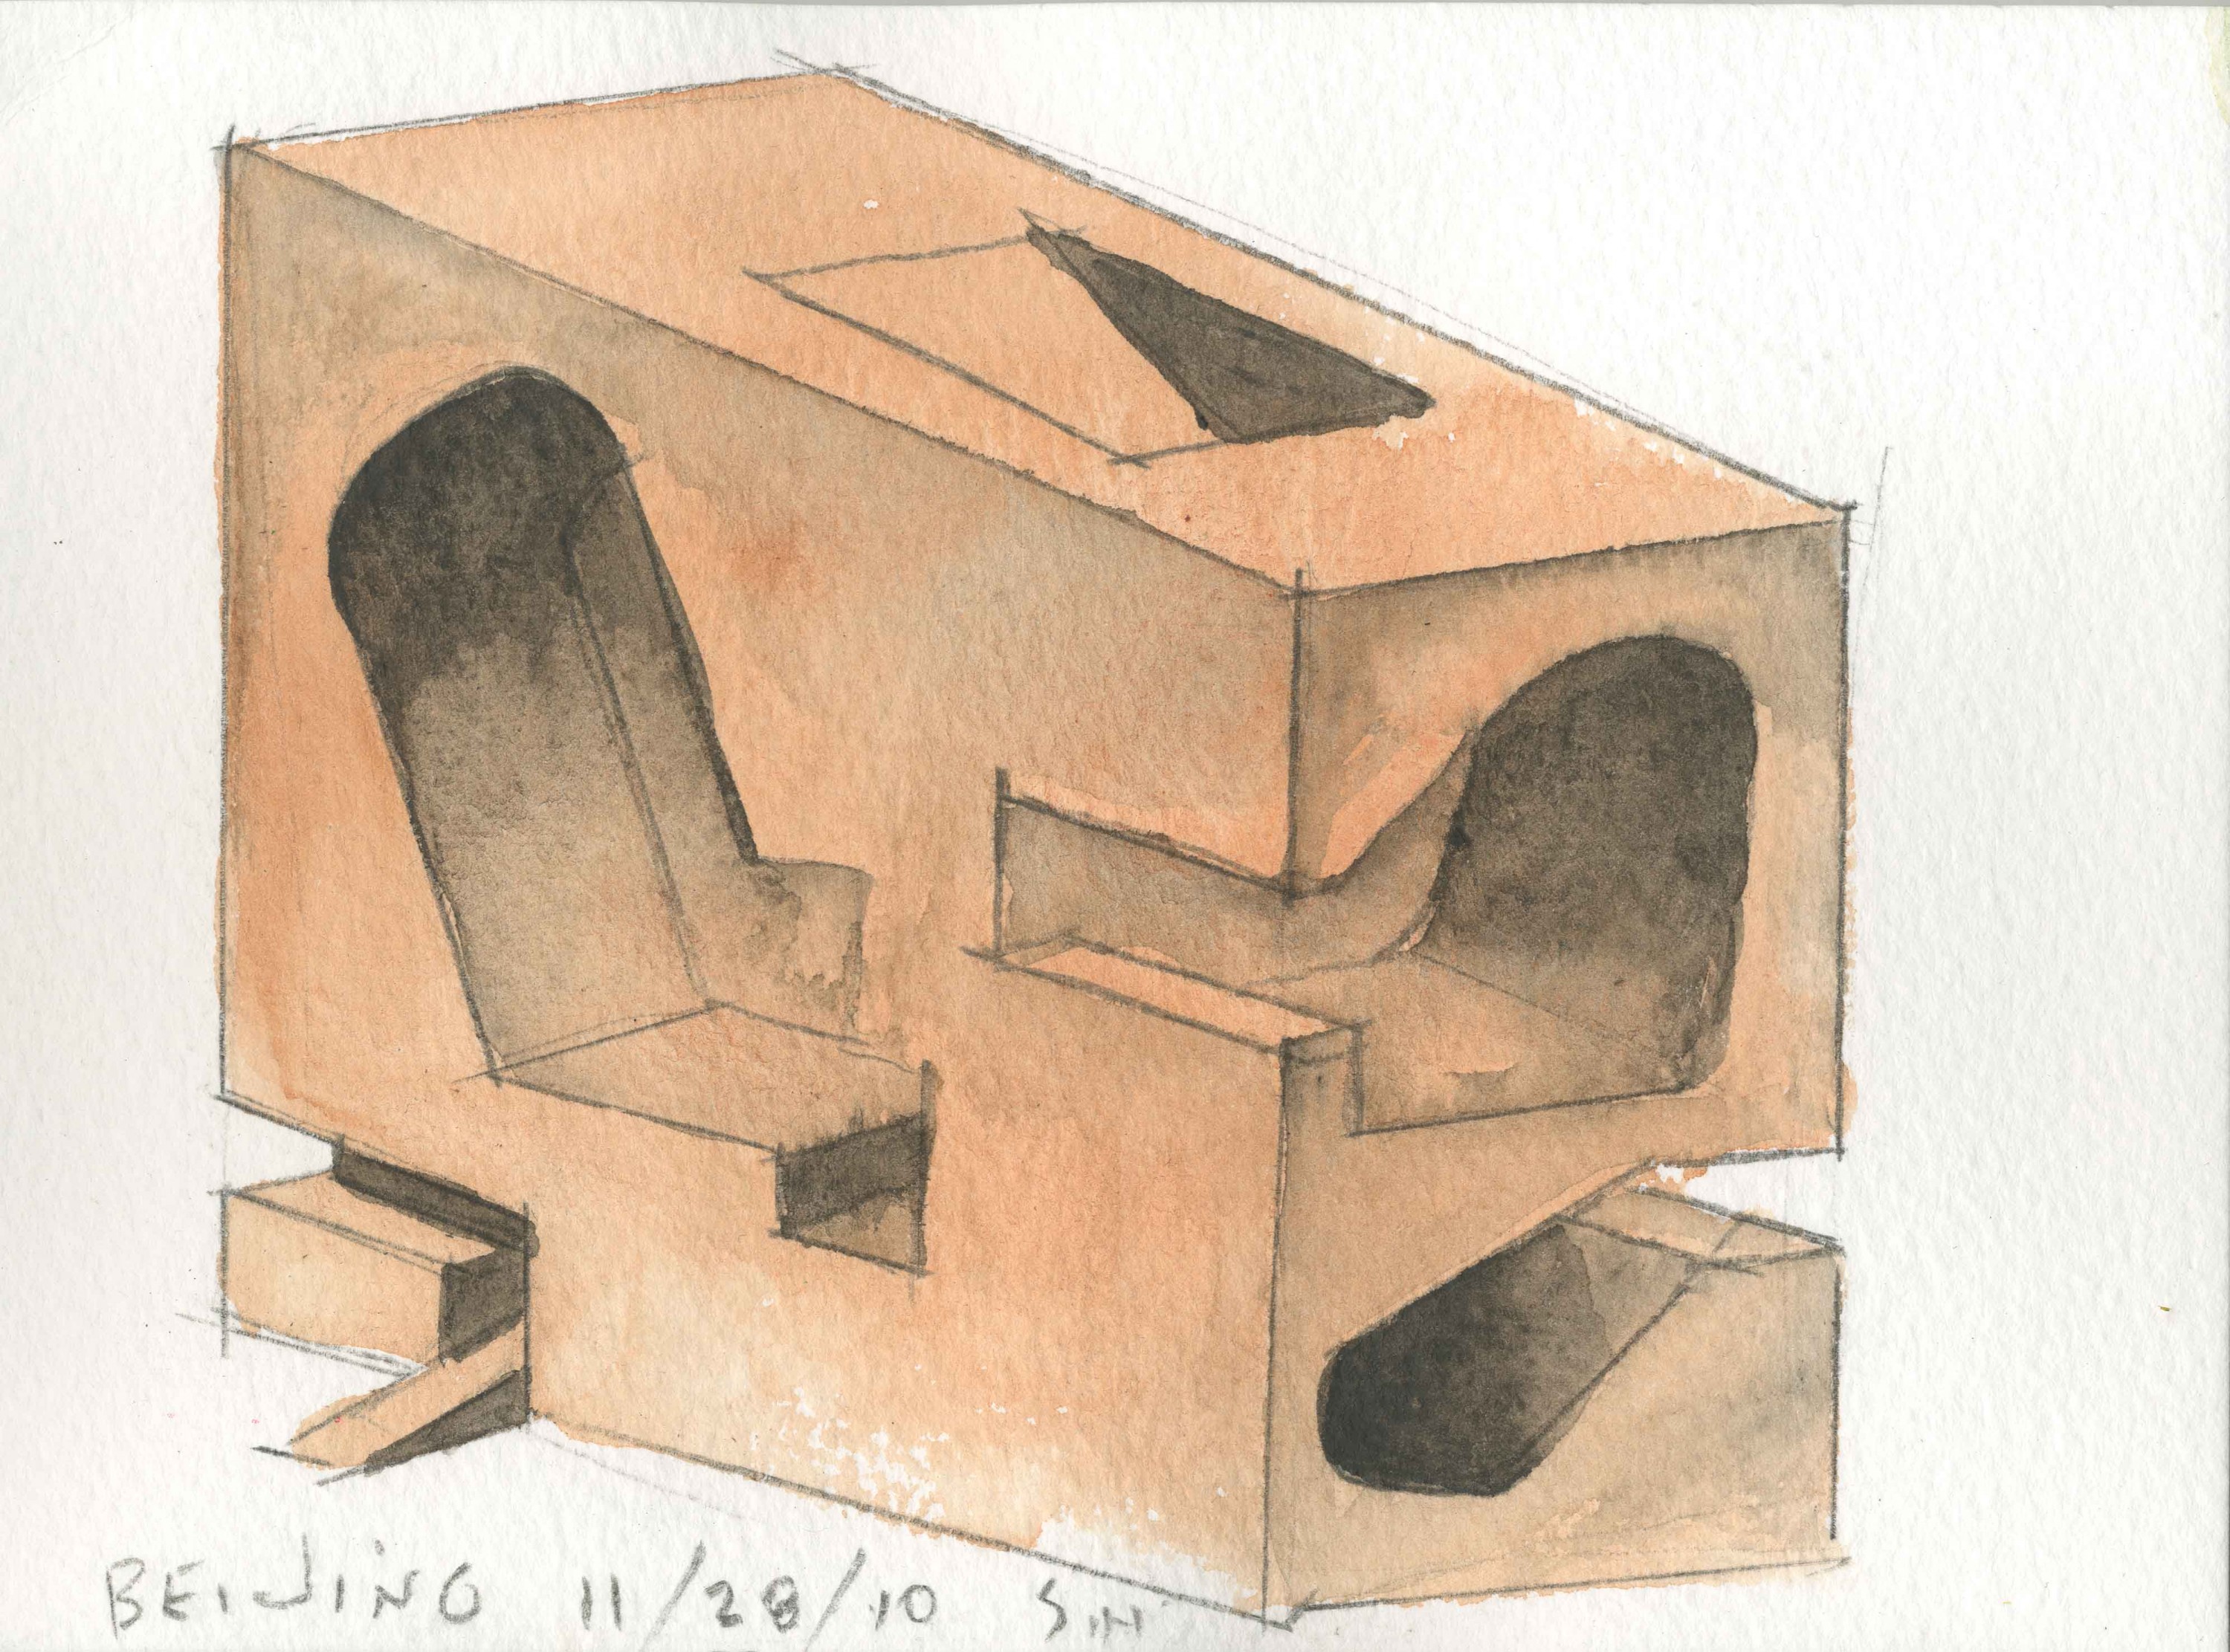 PIN–UP QUOTE: STEVEN HOLL